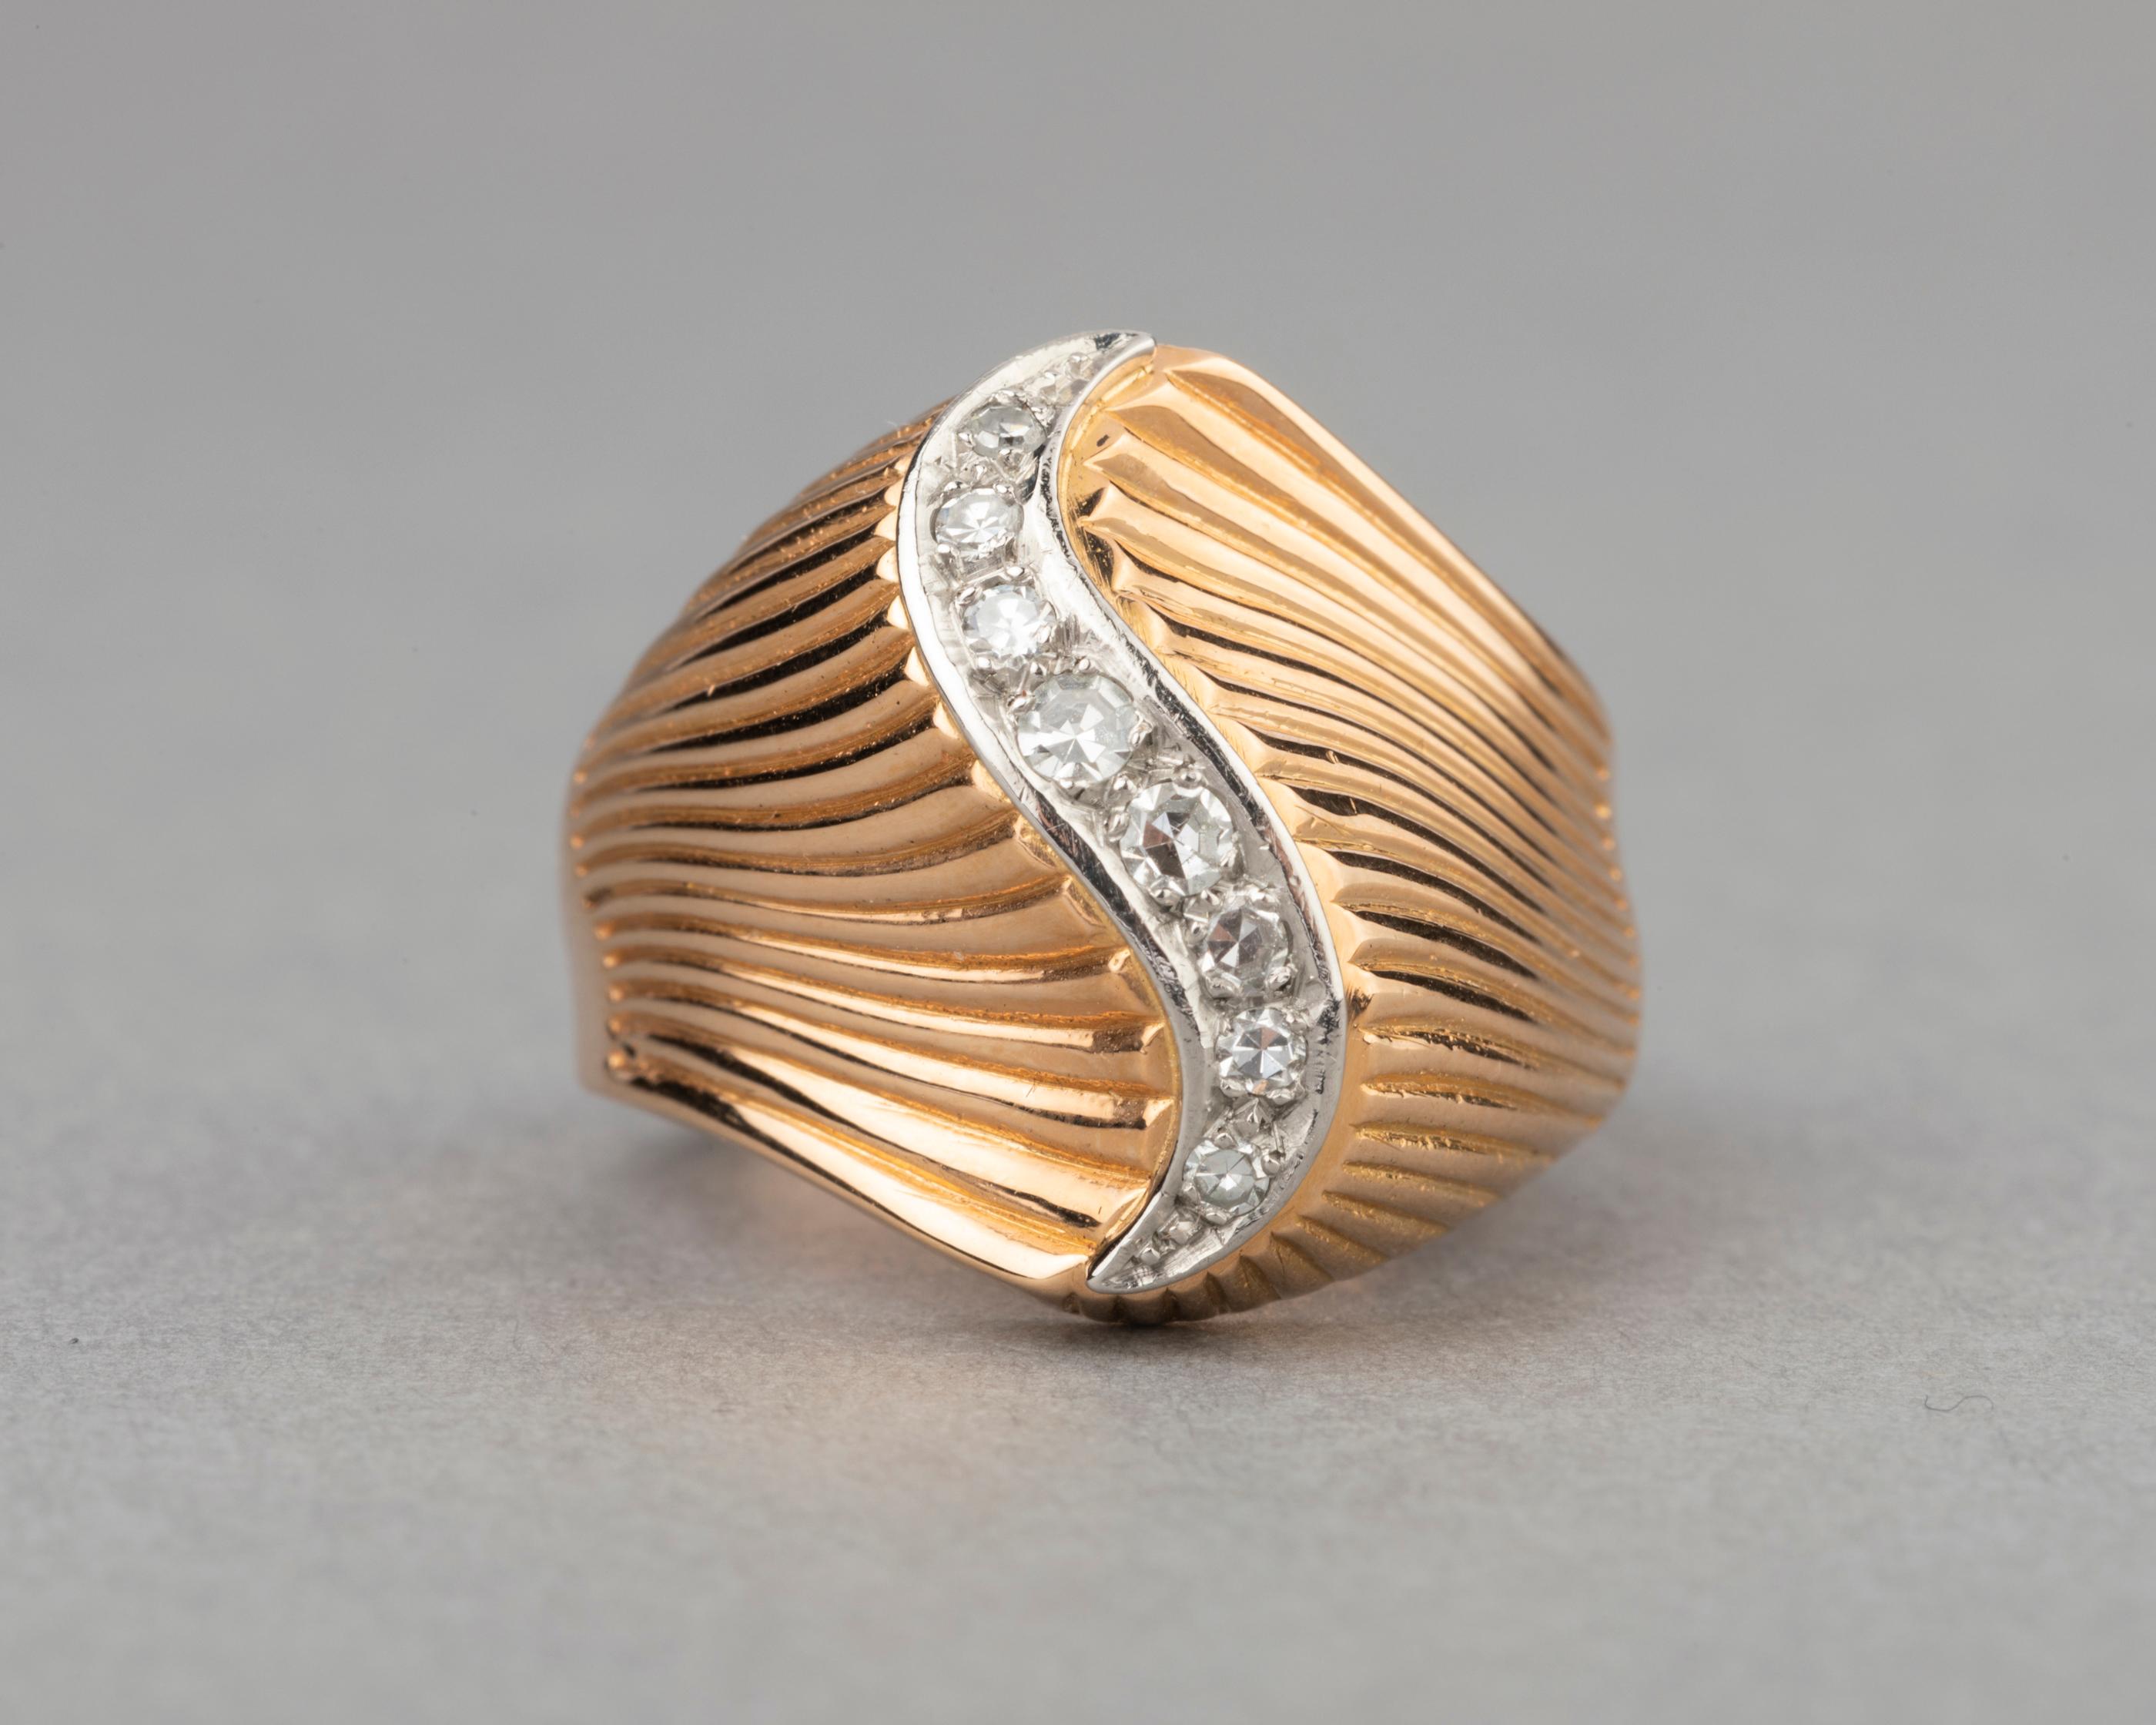 Gold and Diamonds French Vintage Ring

Beautiful ring, made in France circa 1950.
Set with yellow gold 18k and platinum. French marks for gold (eagle head) and platinum (dog head).
The diamonds weights O.40 carats estimate.
Ring size 52.5 or 6.25